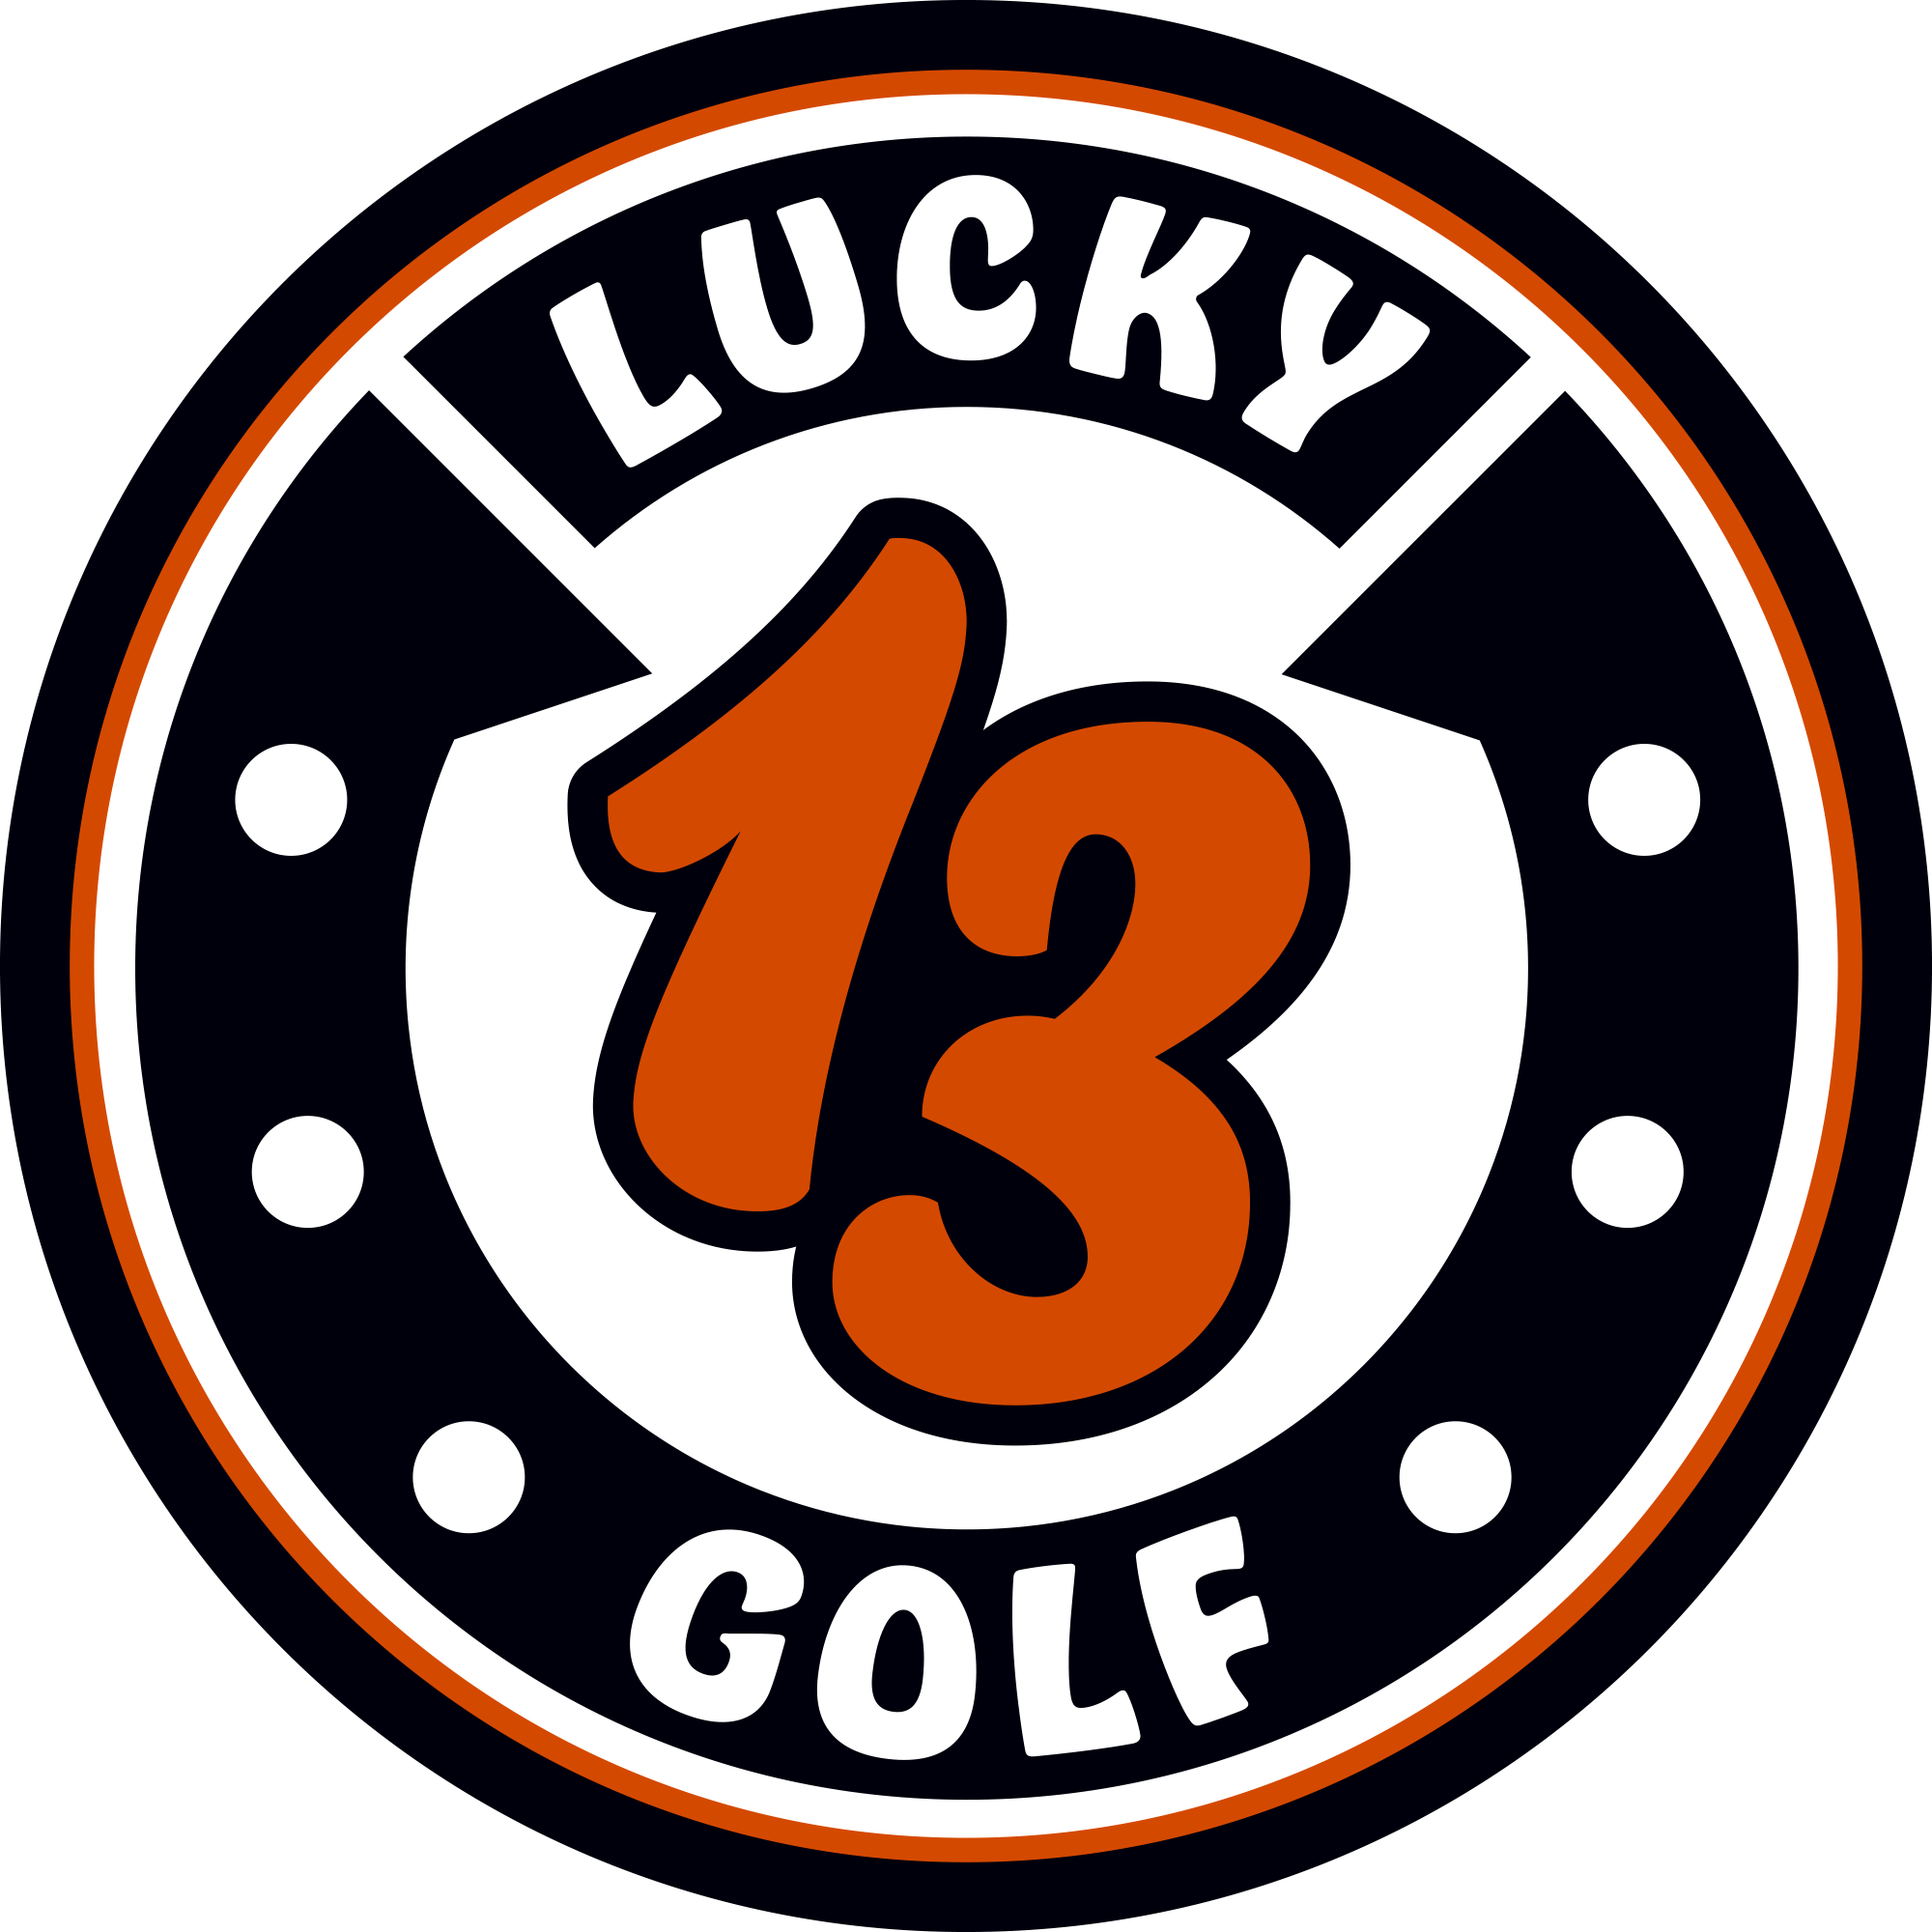 Lucky 13 Golf - The Newest Golf Lifestyle Brand in the Golf Industry